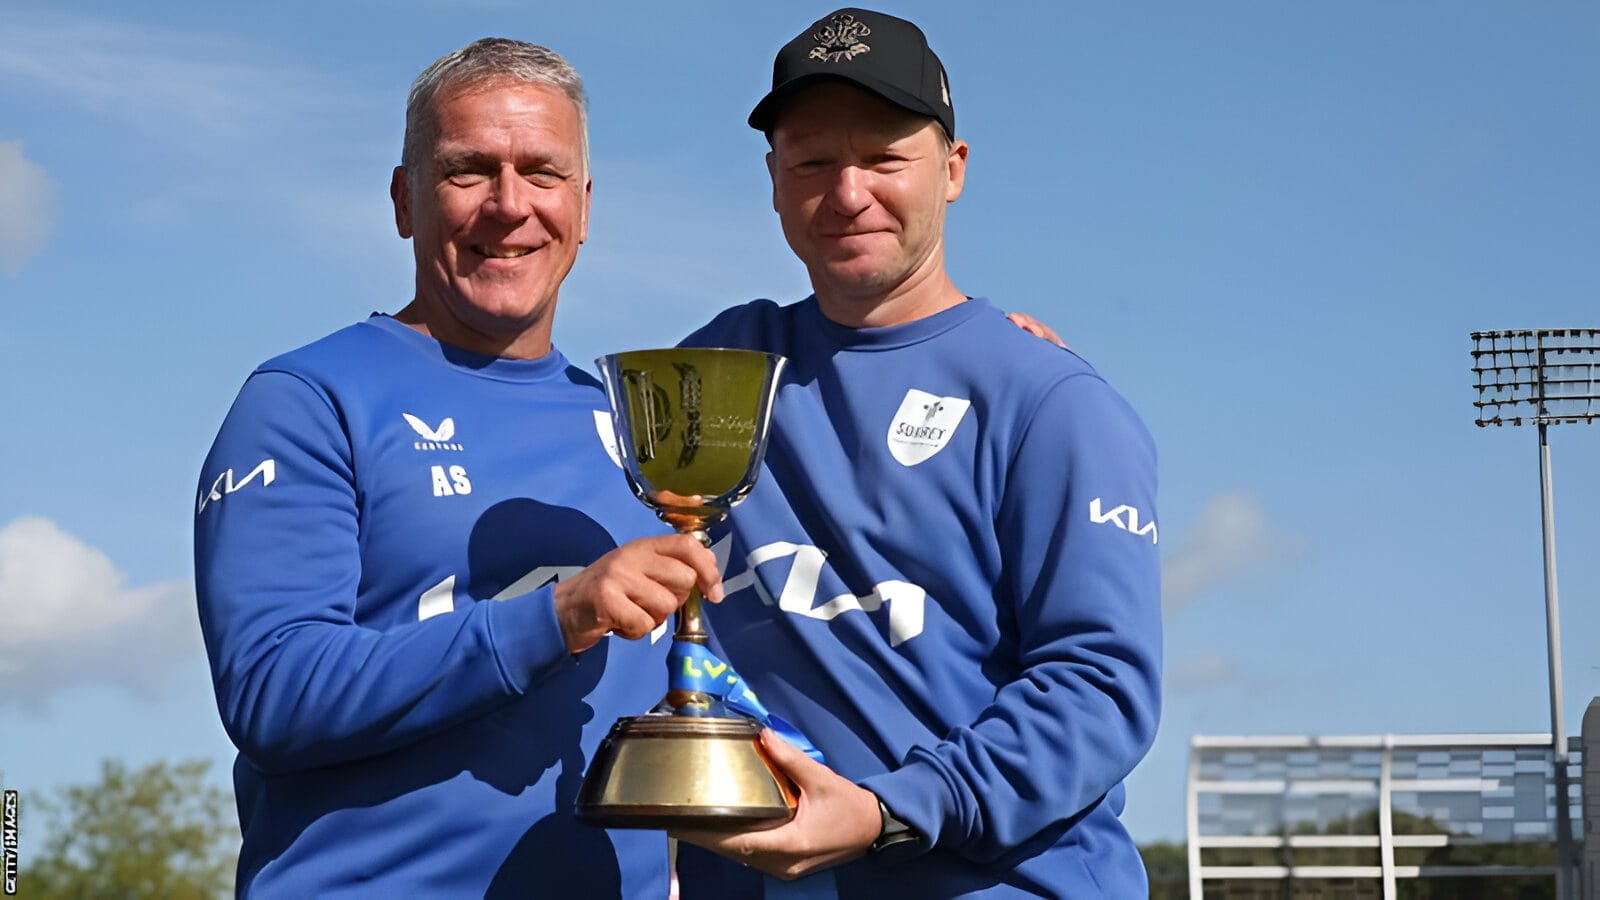 Head coach Gareth Batty believes that Alec Stewart, the outgoing director of cricket at Surrey, is irreplaceable